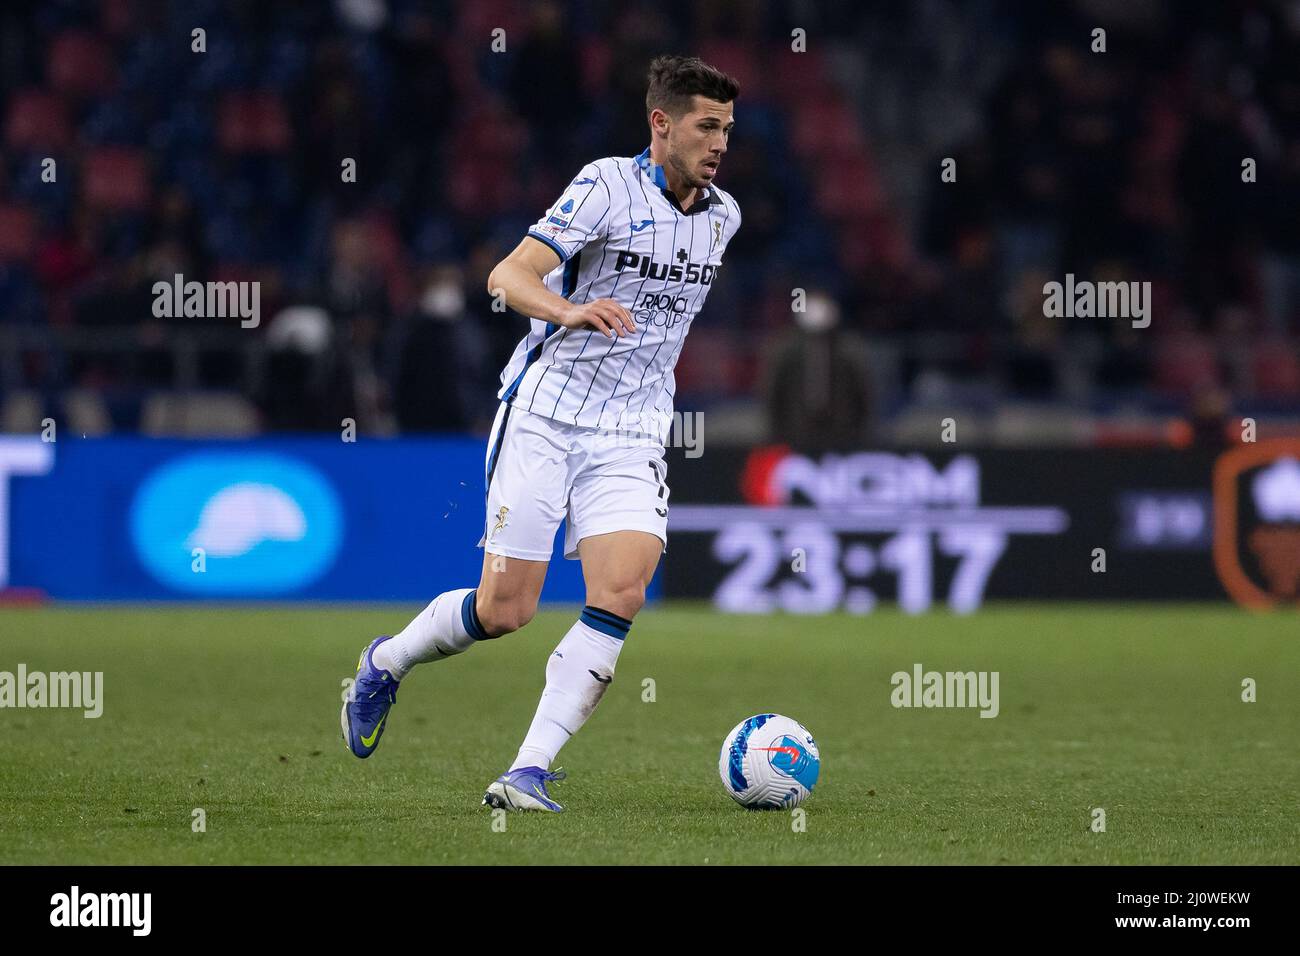 Bologna, Italy. 20 March, 2022. Remo Freuler of Atalanta BC in action during the Serie A match between Bologna FC and Atalanta BC at Stadio Renato Dall'Ara on March 20, 2022. Credit: Ciancaphoto Studio/Alamy Live News Stock Photo